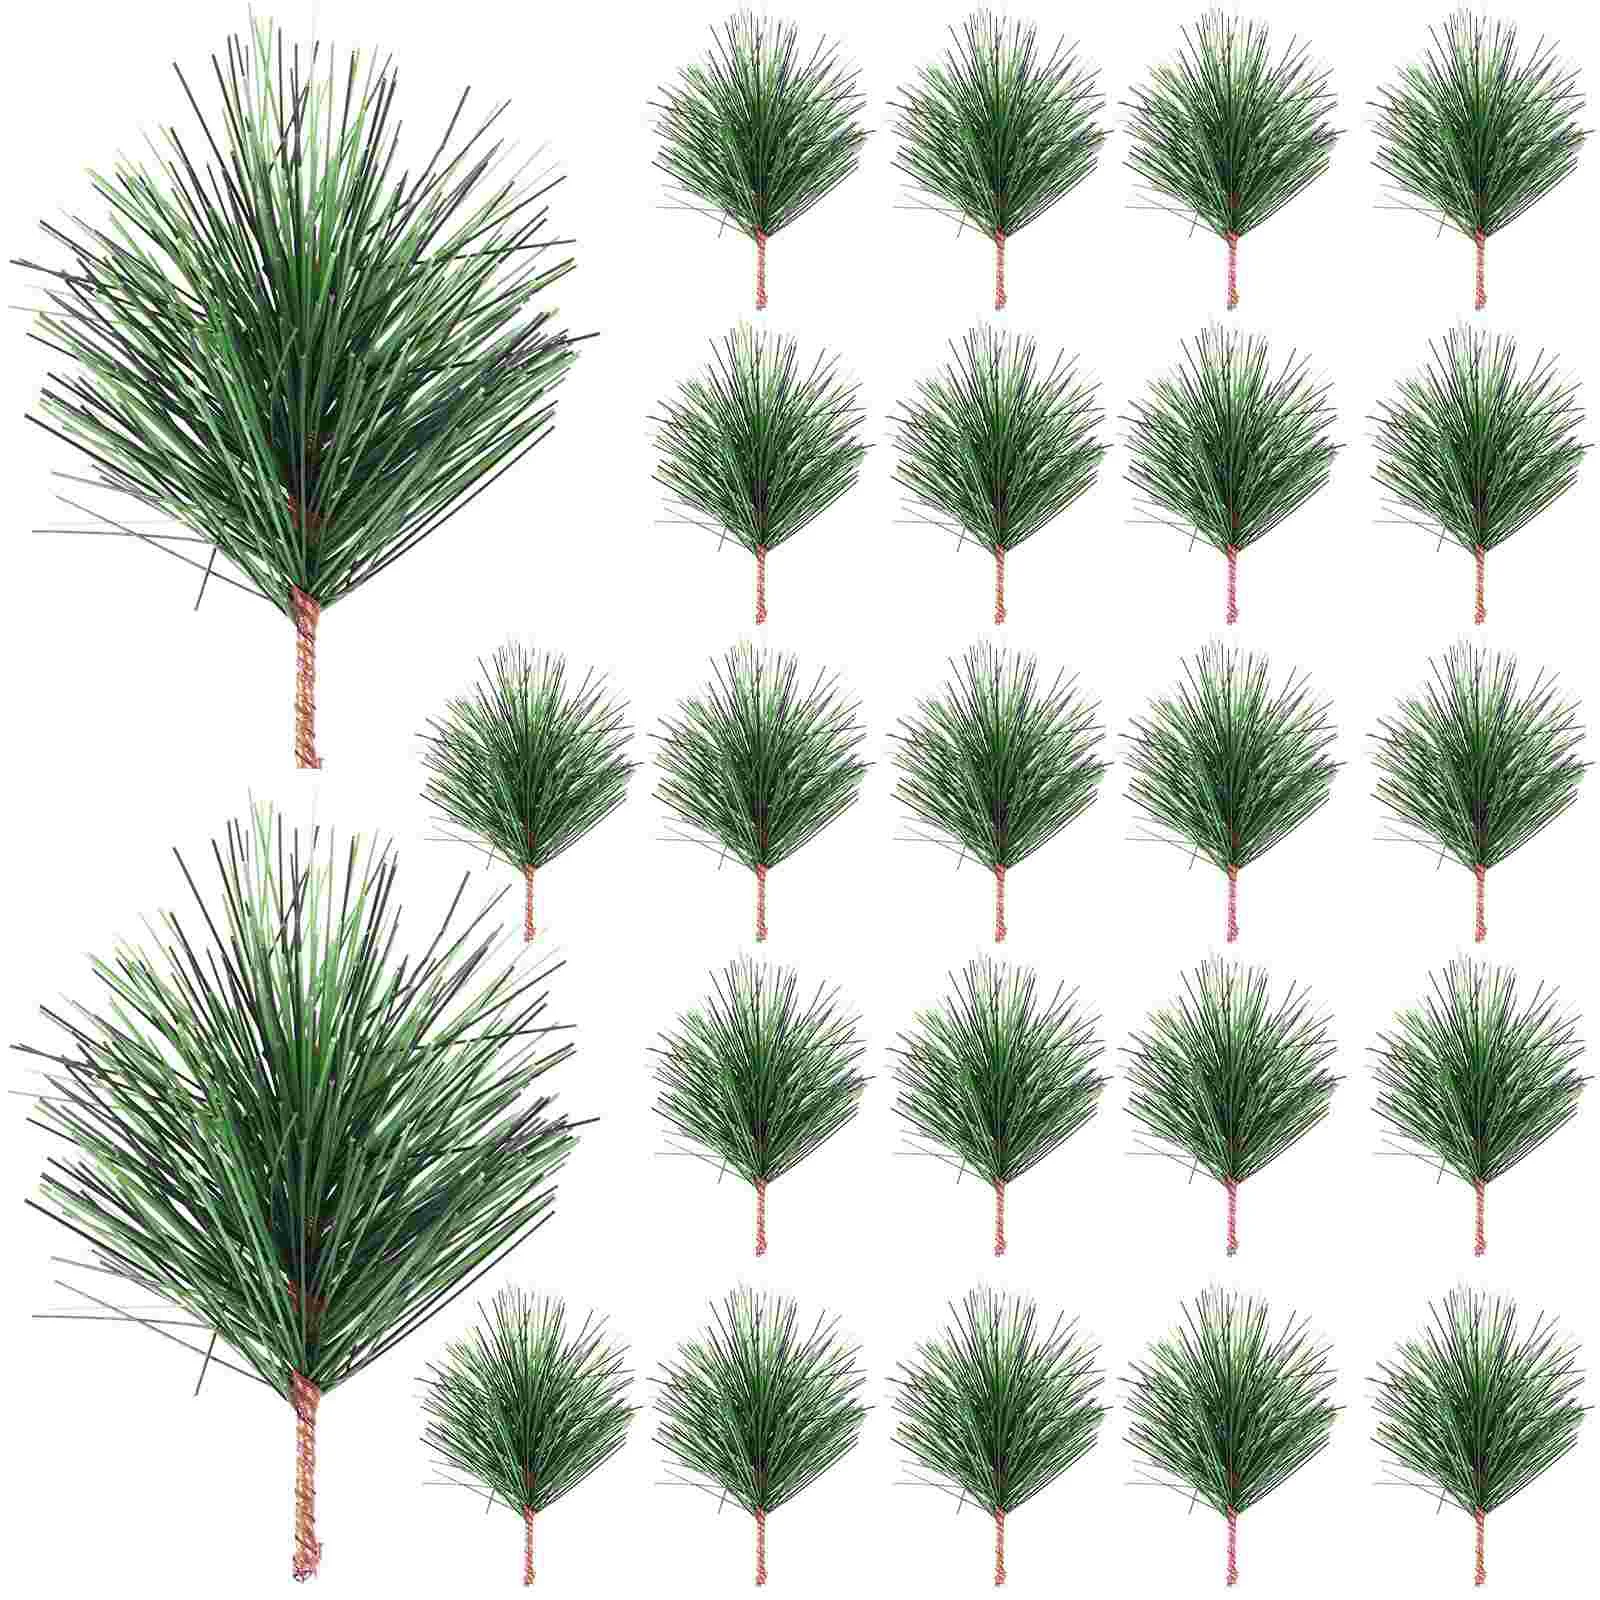 

24pcs Artificial Pine Branches Green Plants Pine Needles DIY Accessories for Garland Wreath Christmas Embellishing Xmas